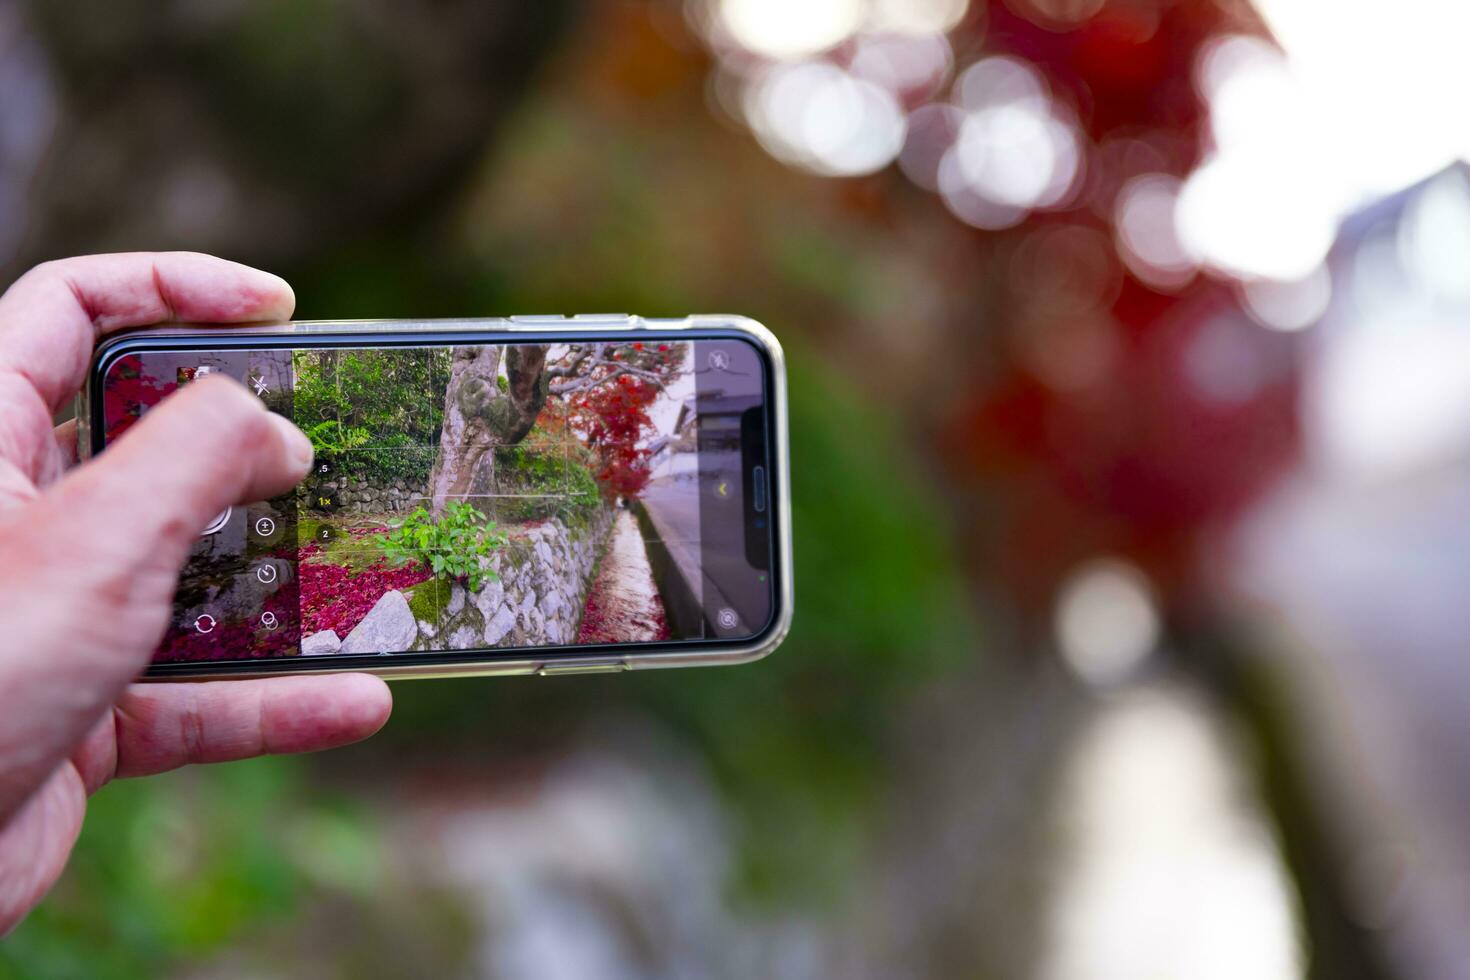 A smartphone shooting piled up red leaves in the narrow gutter in autumn photo